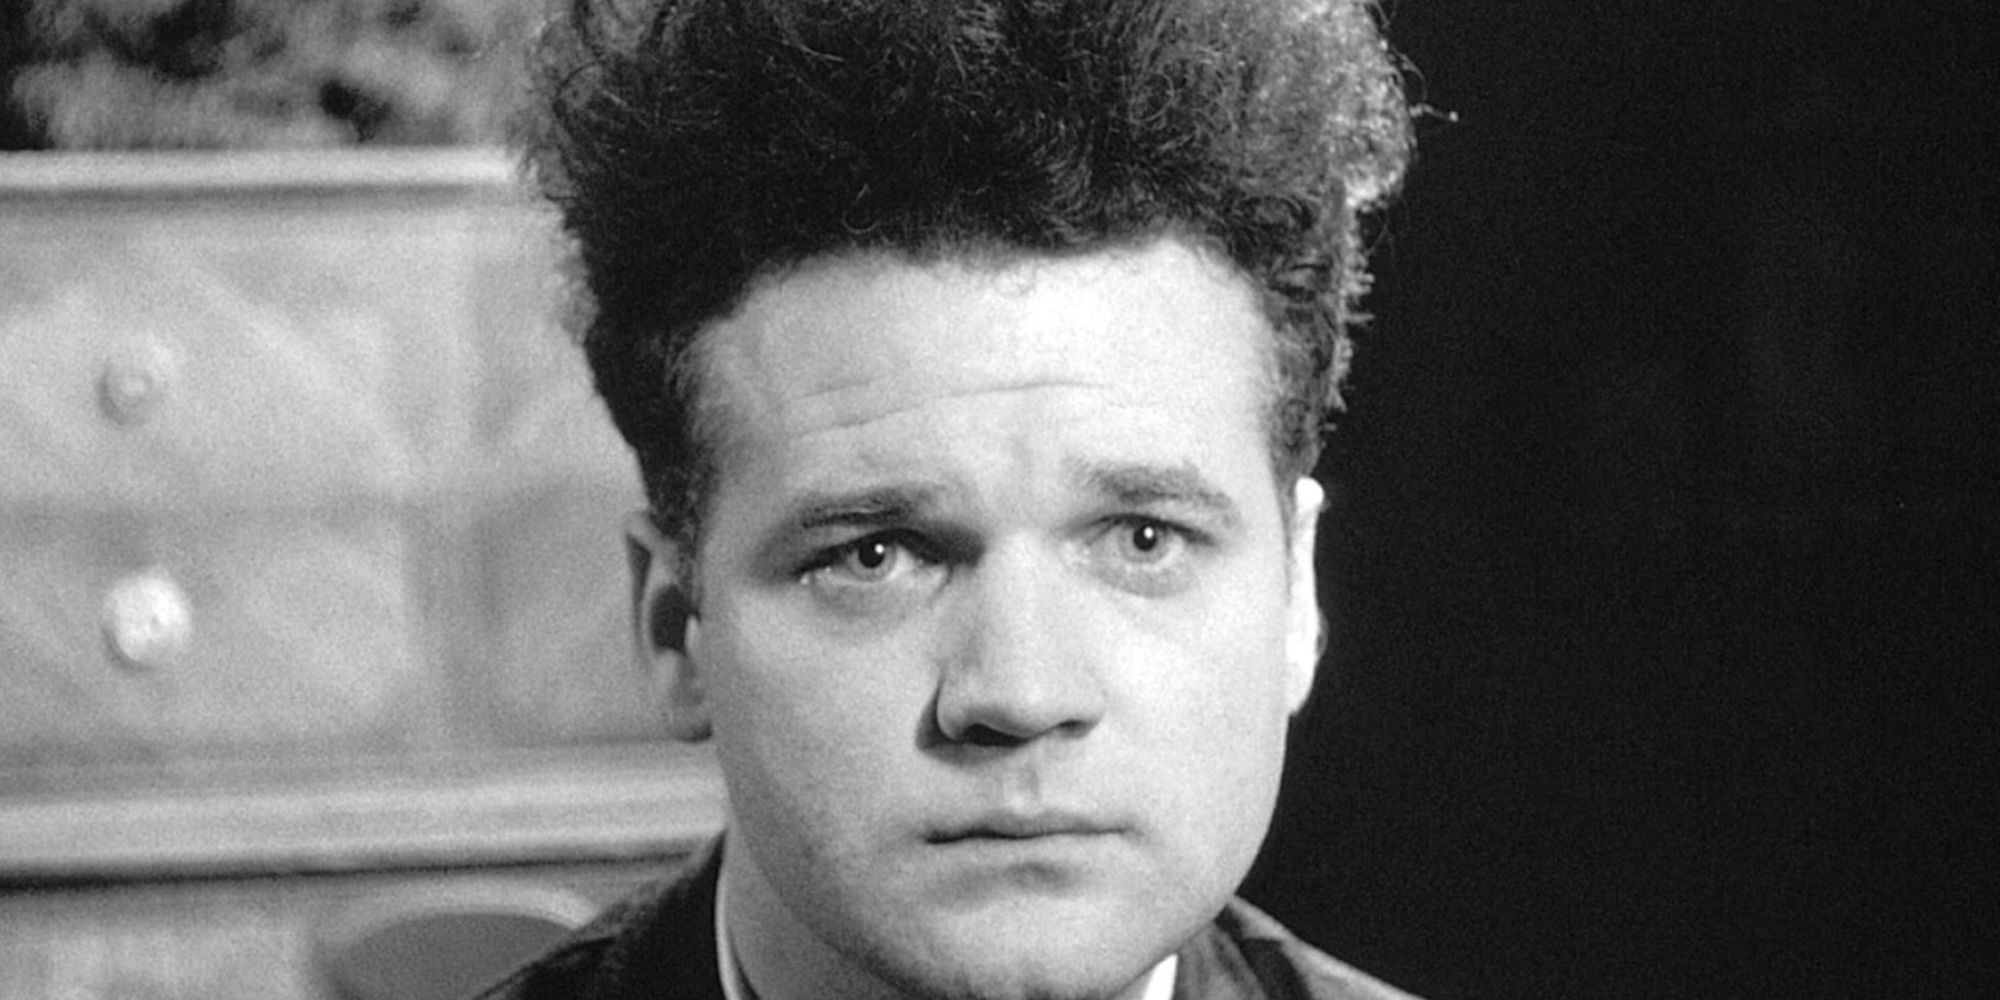 A shot of Jack Nance with a worried expression in Eraserhead